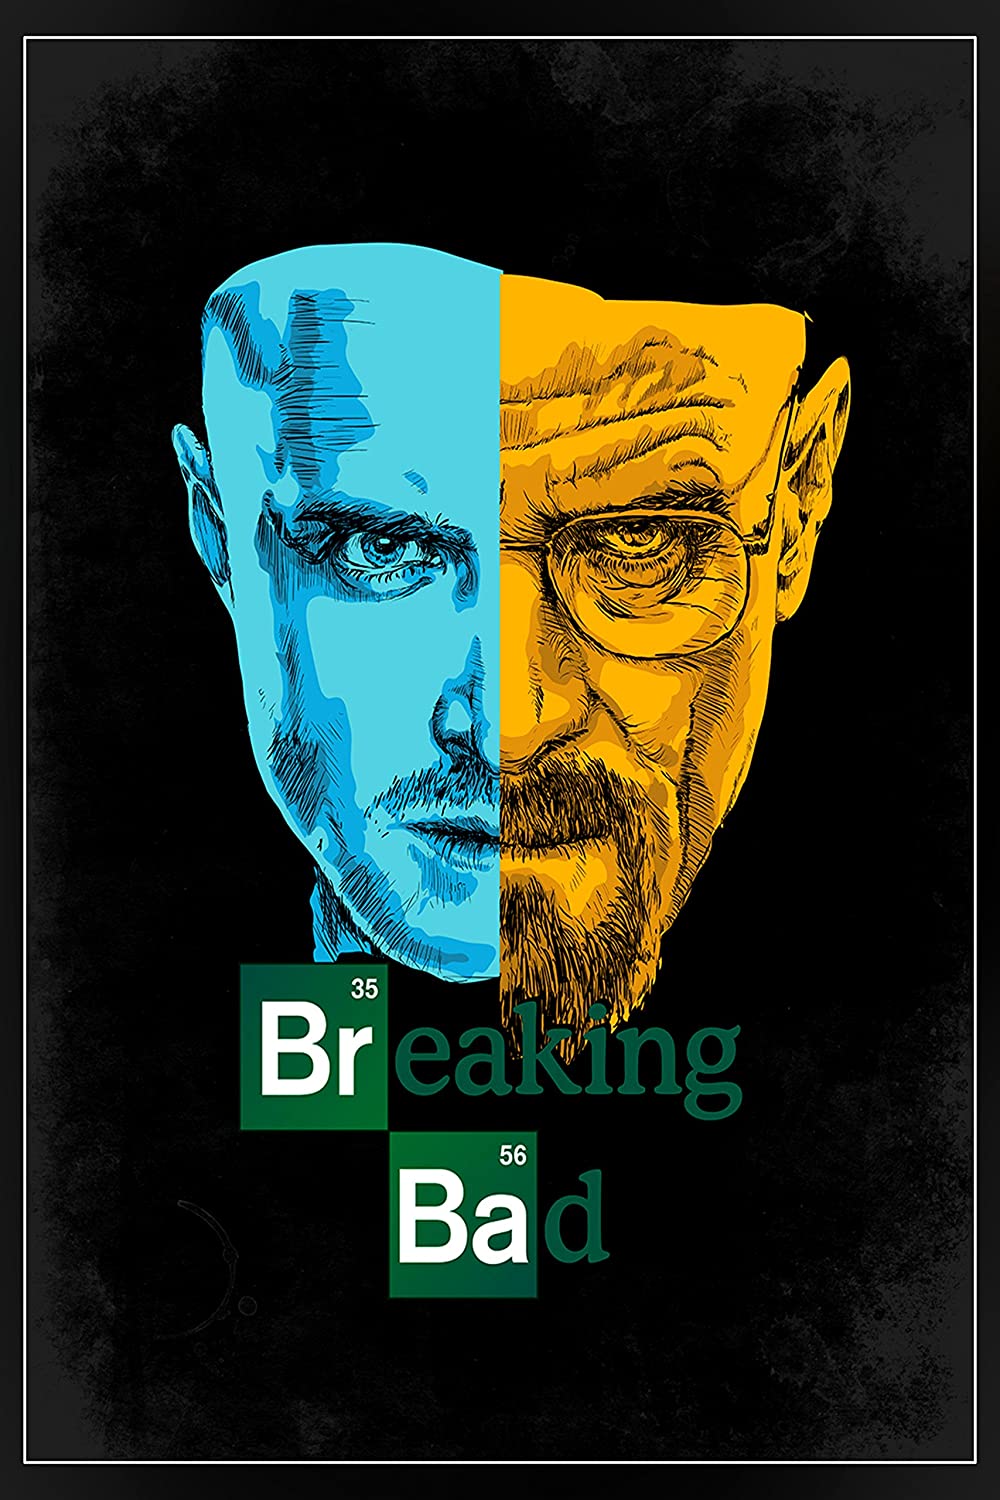 Breaking Bad poster - Source: KnowChill